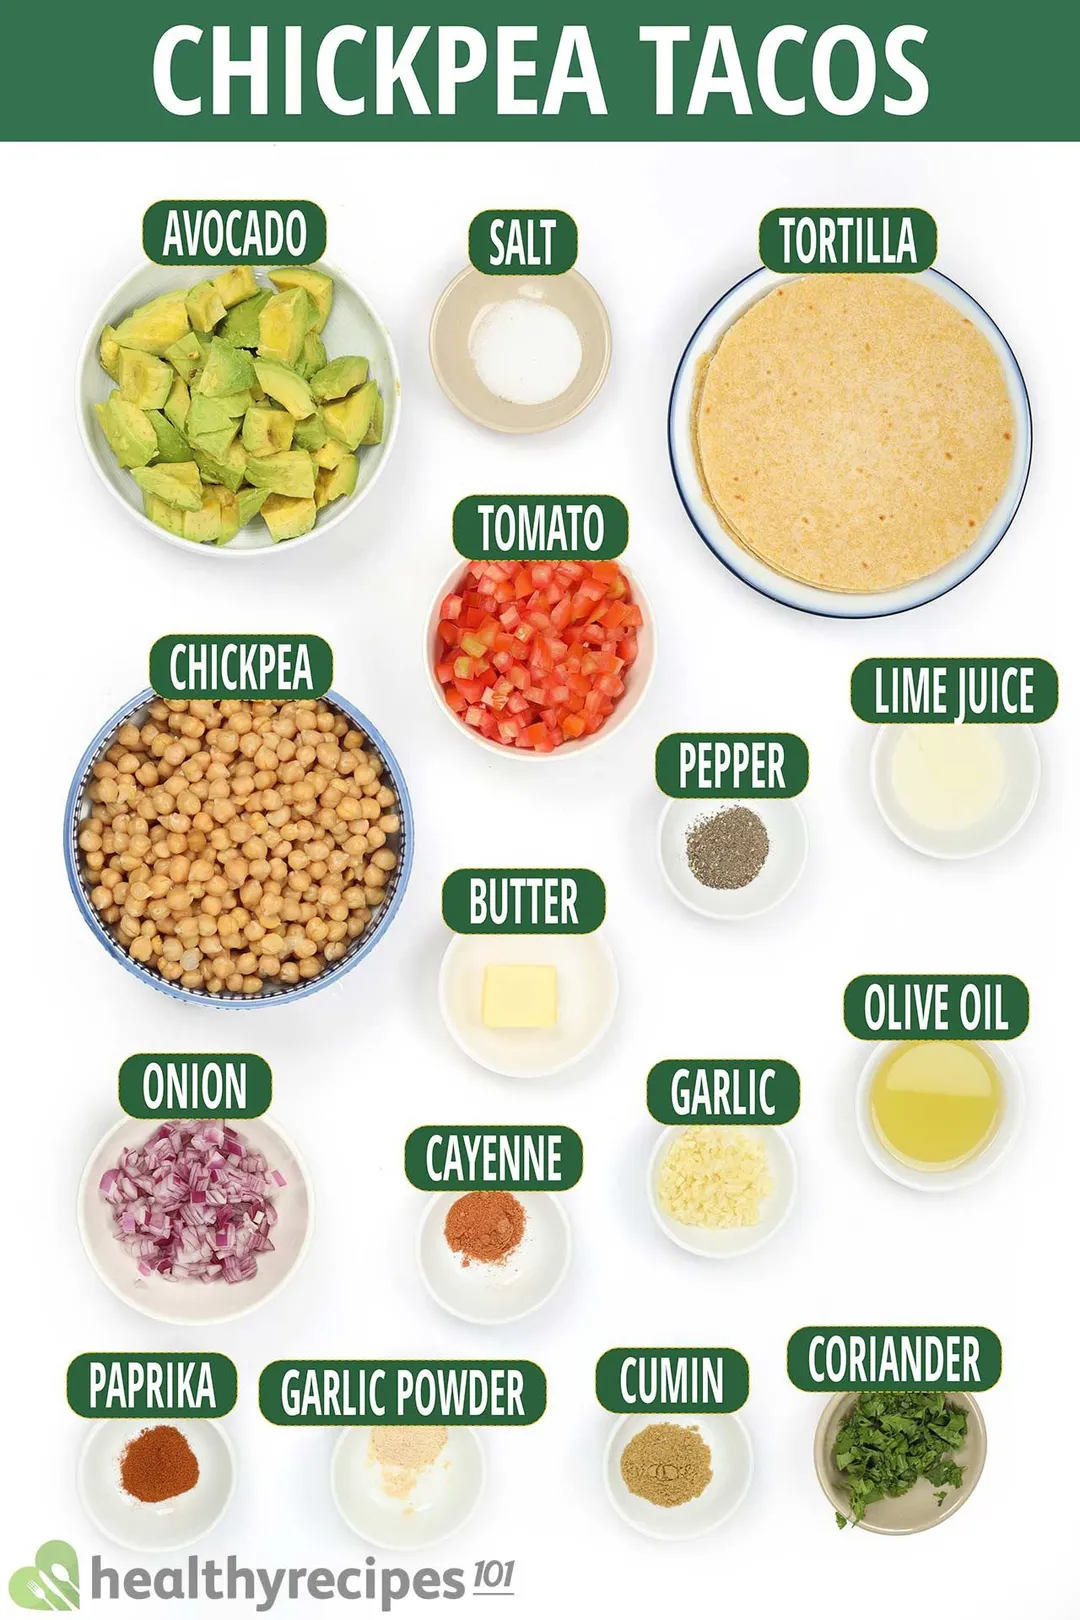 Ingredients for chickpea tacos, including a bowl of chickpeas, tortilla, sliced avocados, diced tomatoes, and various condiments.